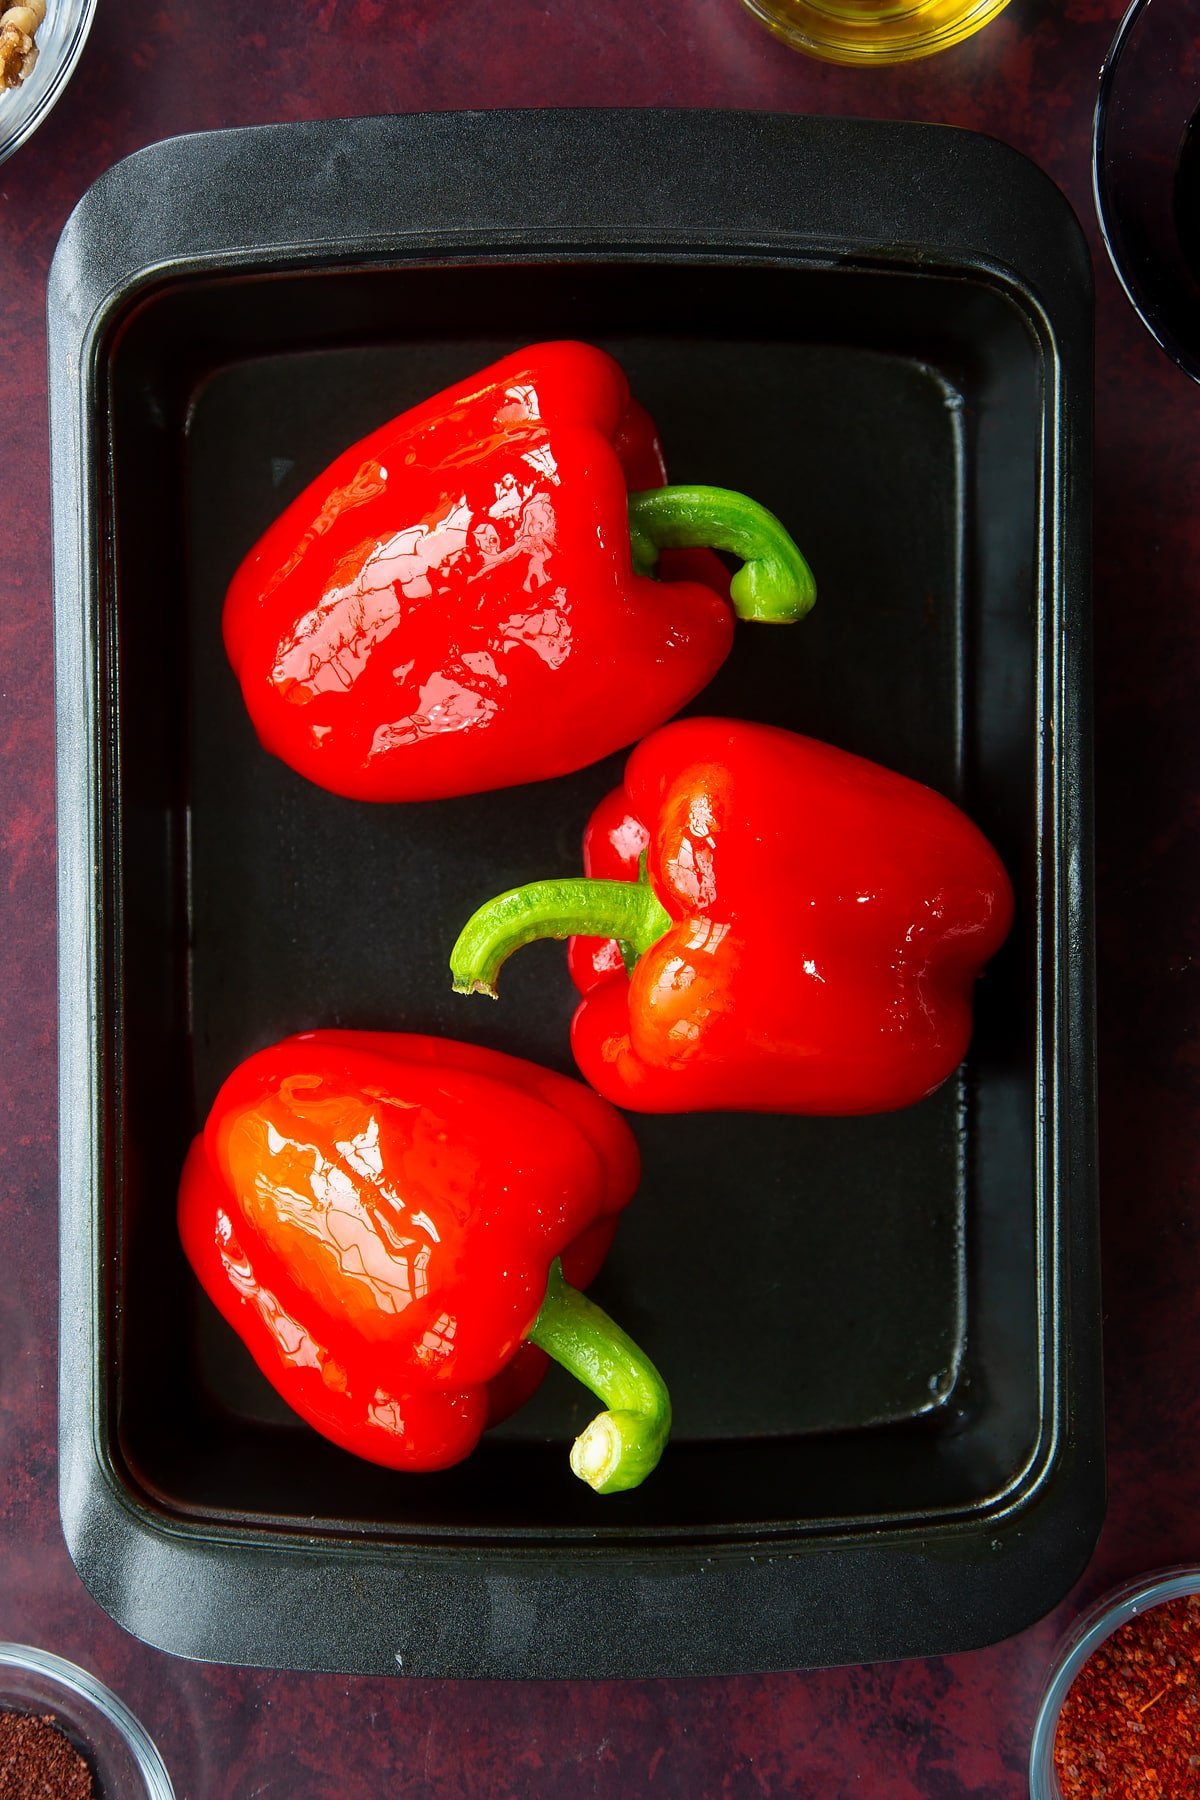 3 whole red peppers in a roasting dish.